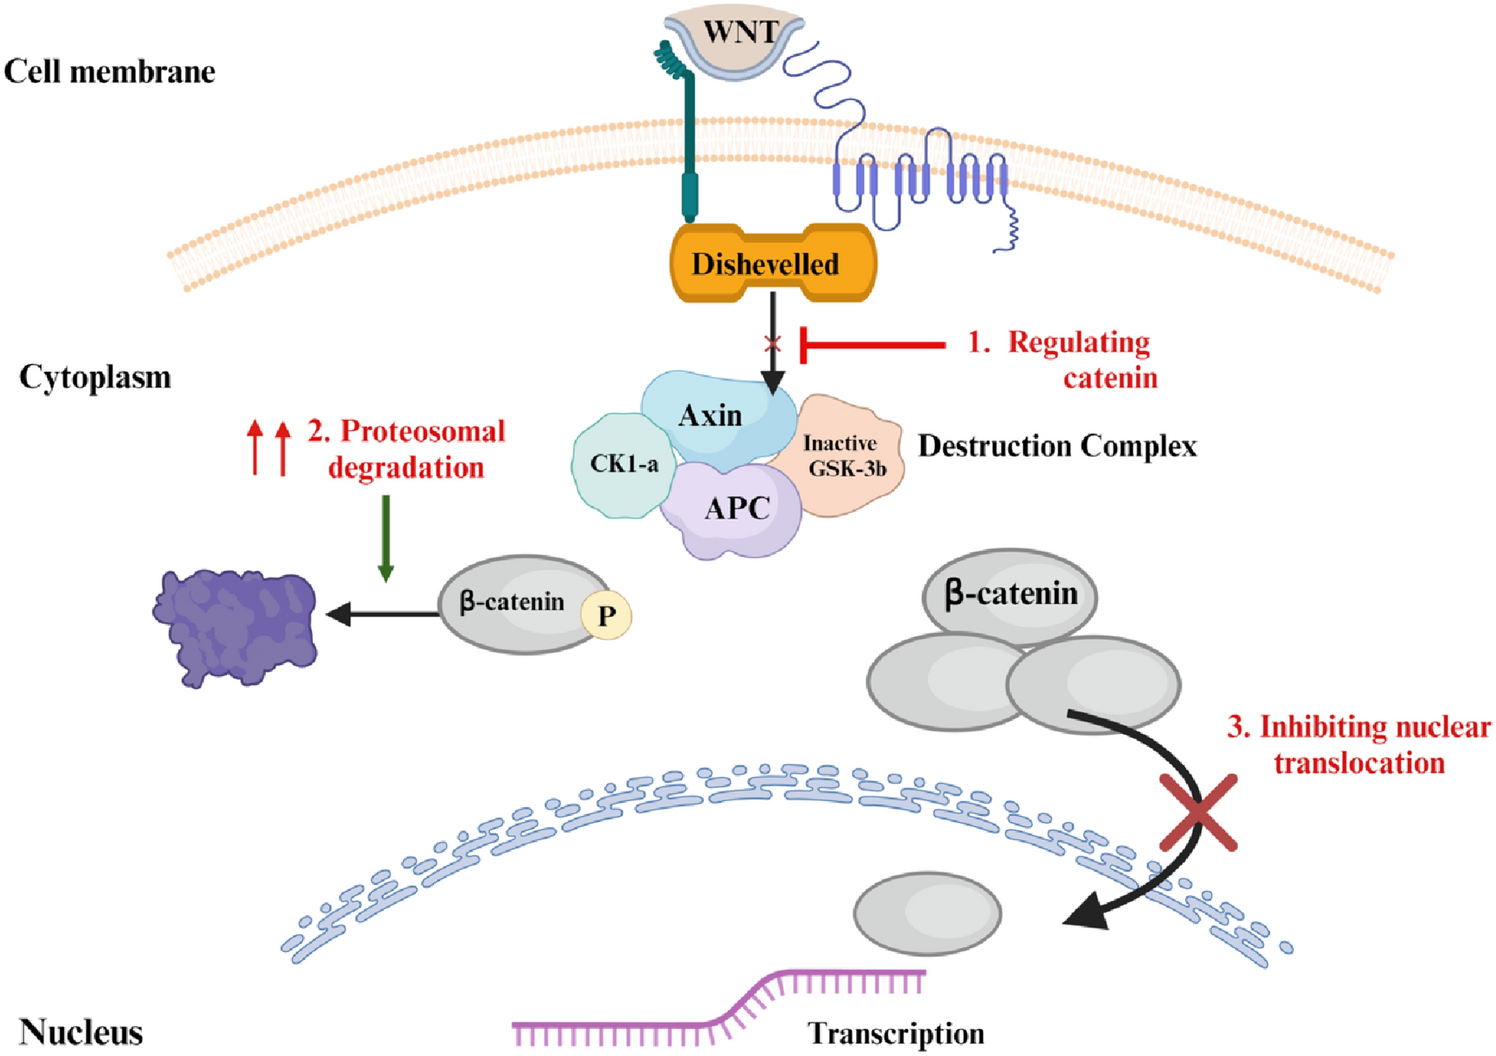 The recent update and advancements of natural products in targeting the Wnt/β-Catenin pathway for cancer prevention and therapeutics